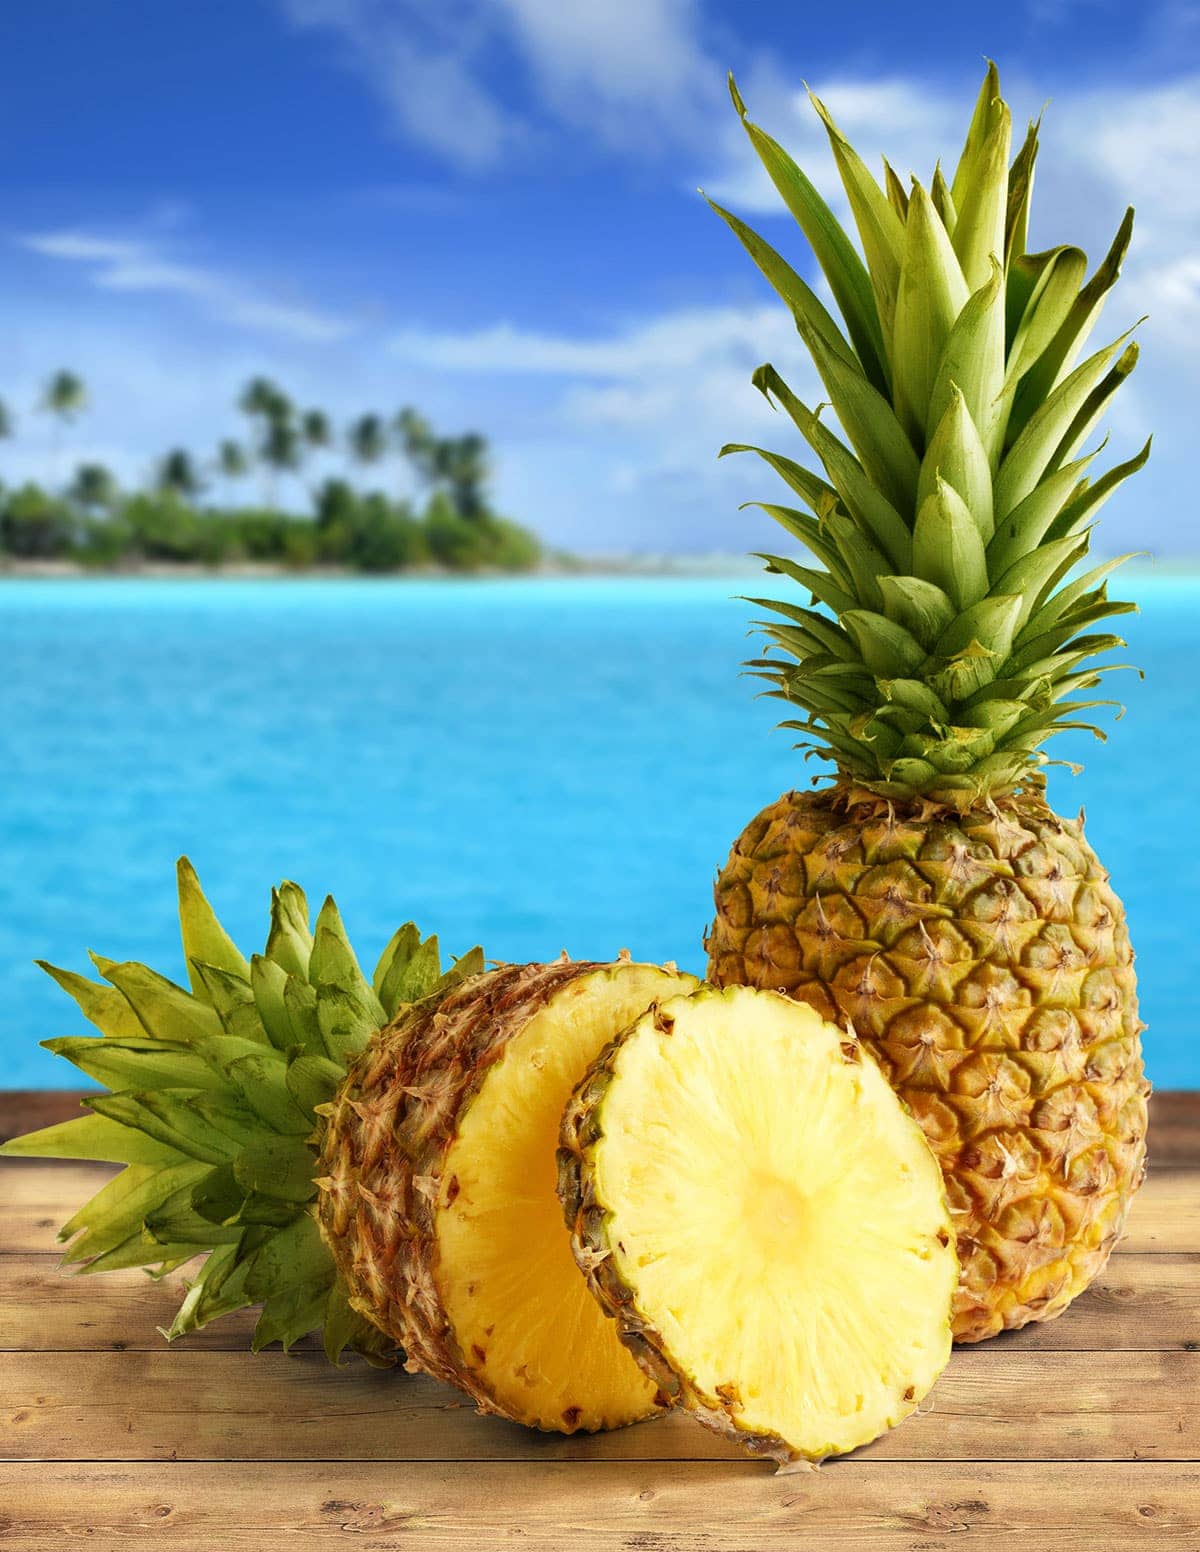 Detail Picture Of A Pineapple Fruit Nomer 44